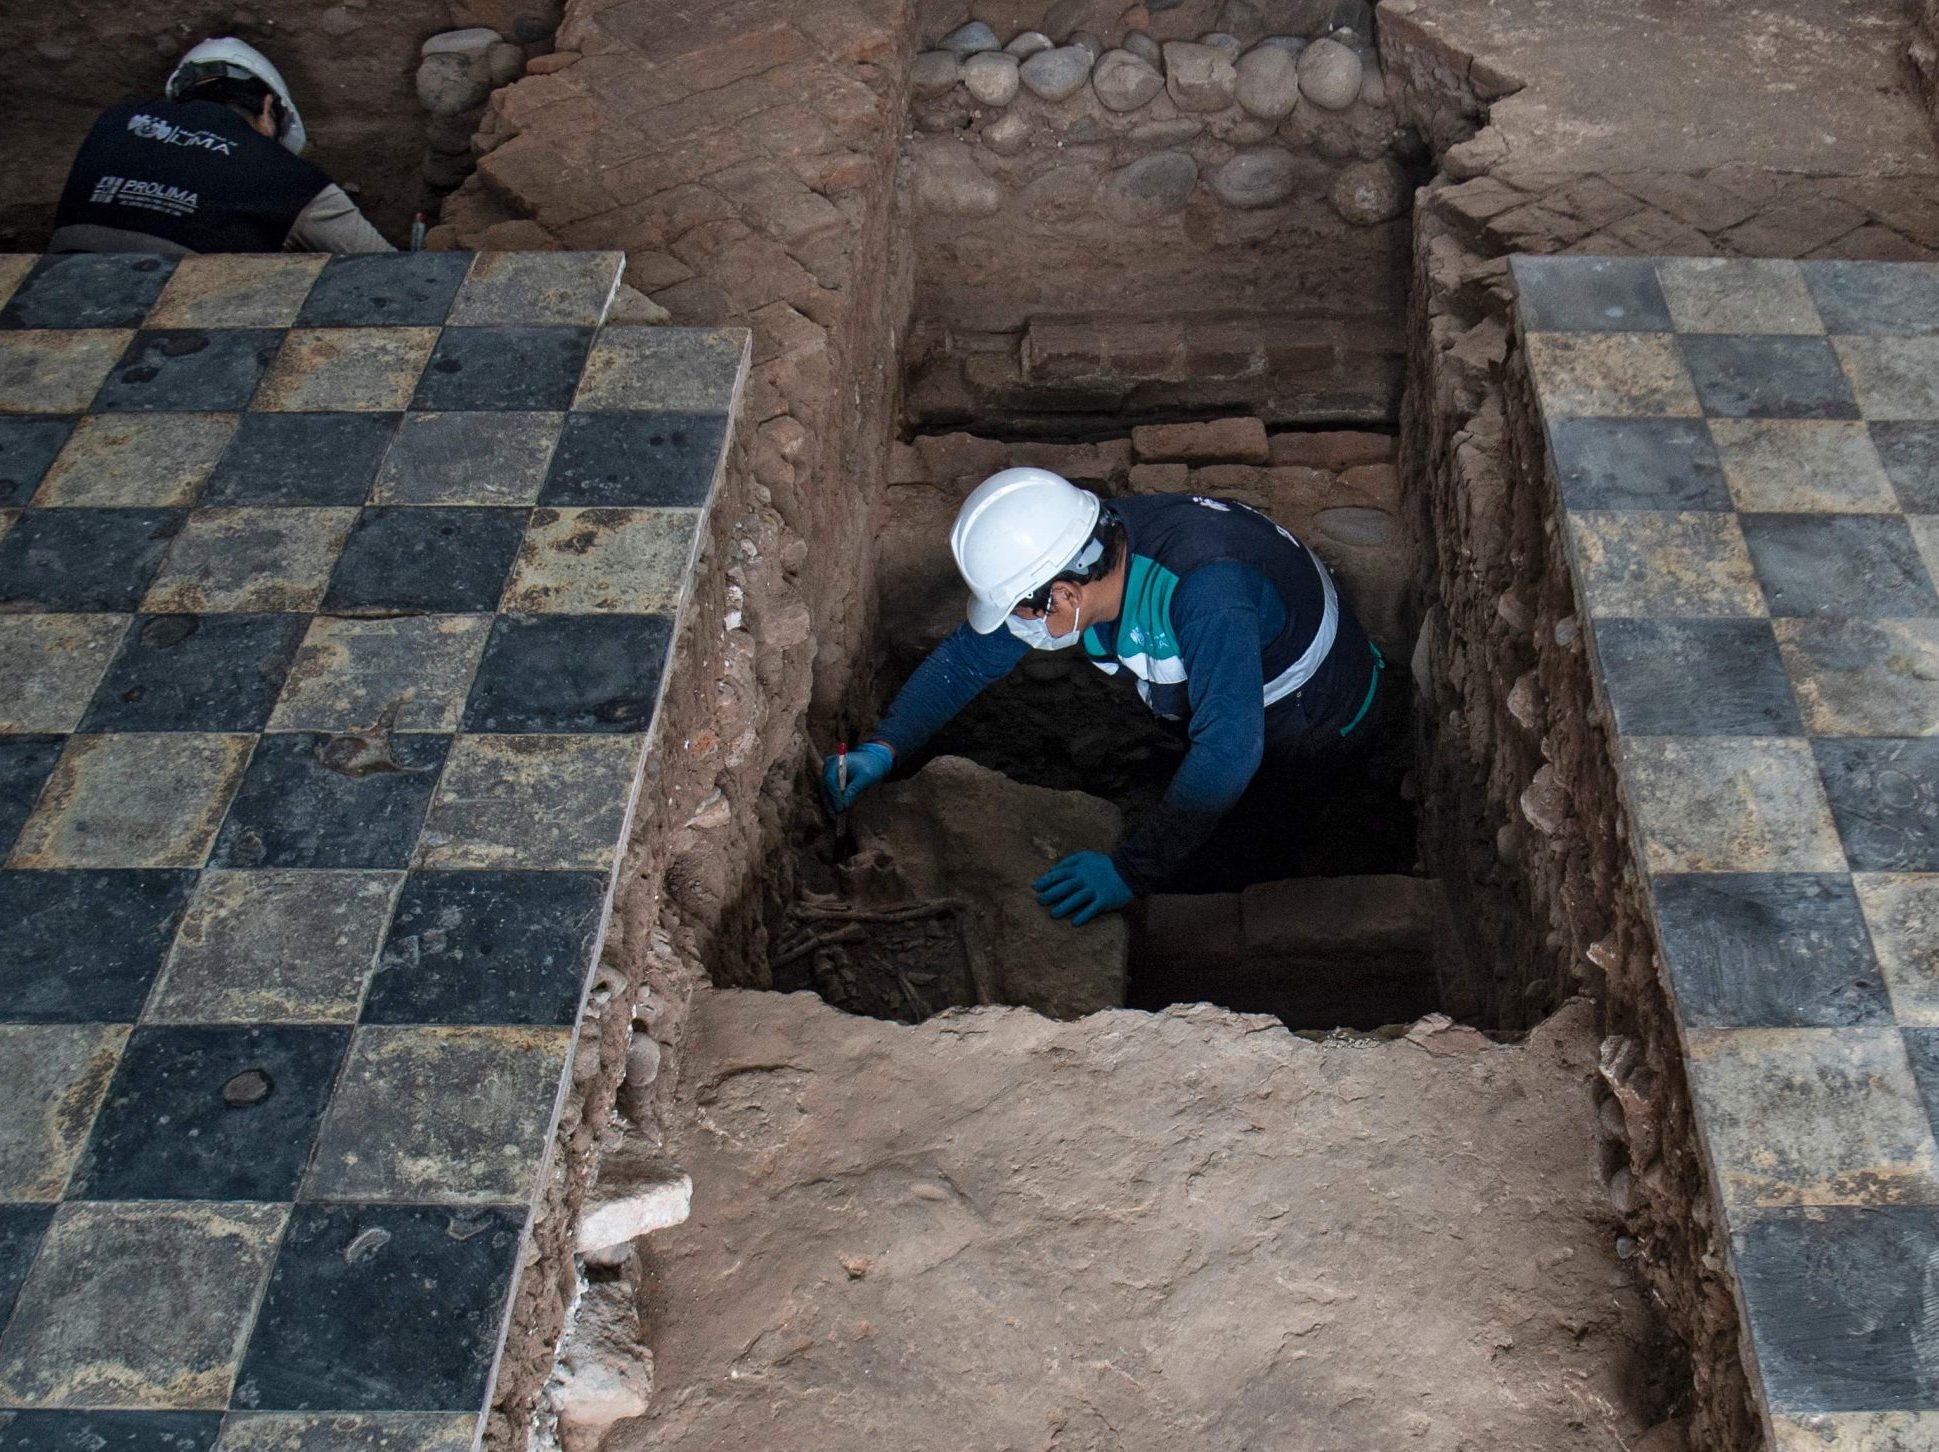 Archeologists discover passageways in 3,000-year-old Peruvian temple – World news